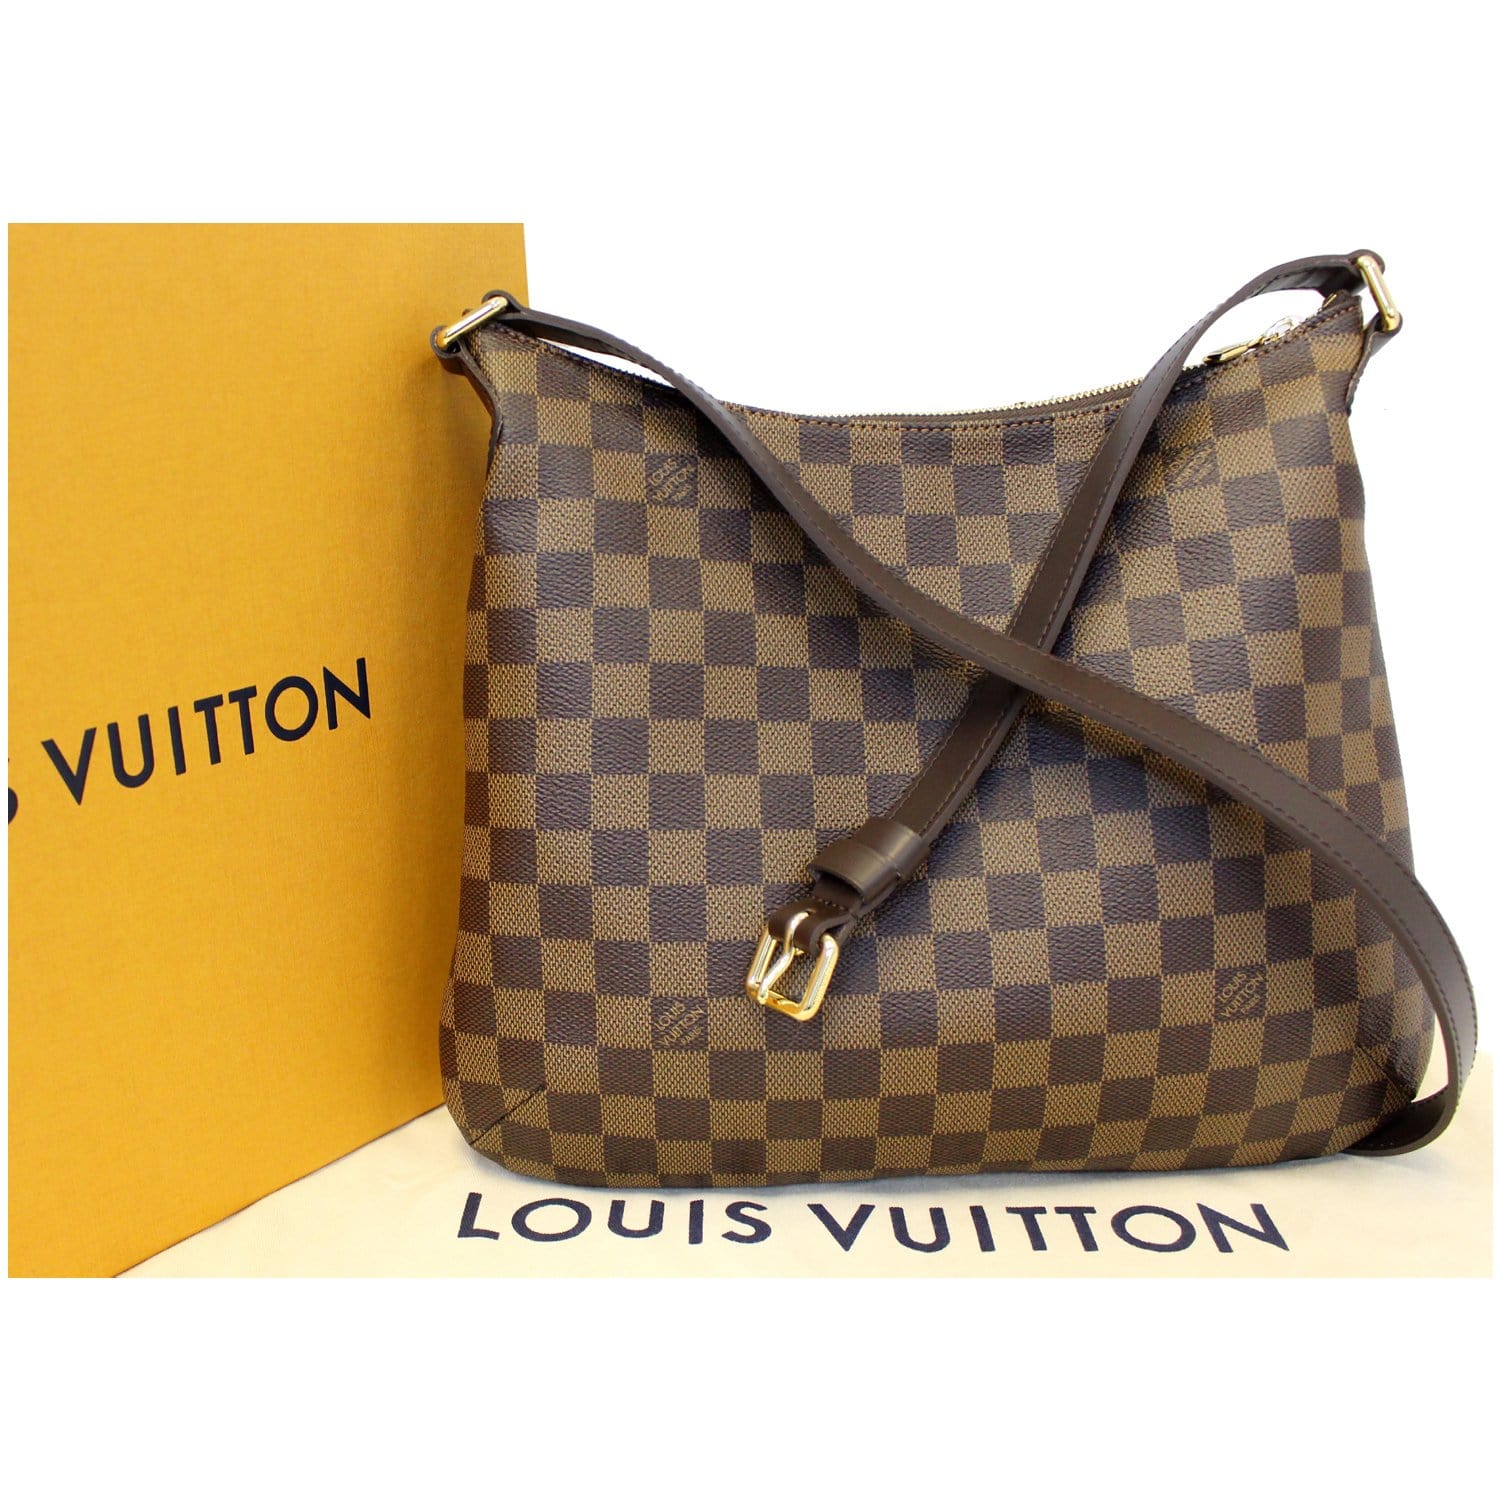 Louis Vuitton appointed the group as Global Ambassadors, Brown Louis  Vuitton Damier Ebene Bloomsbury PM Bag